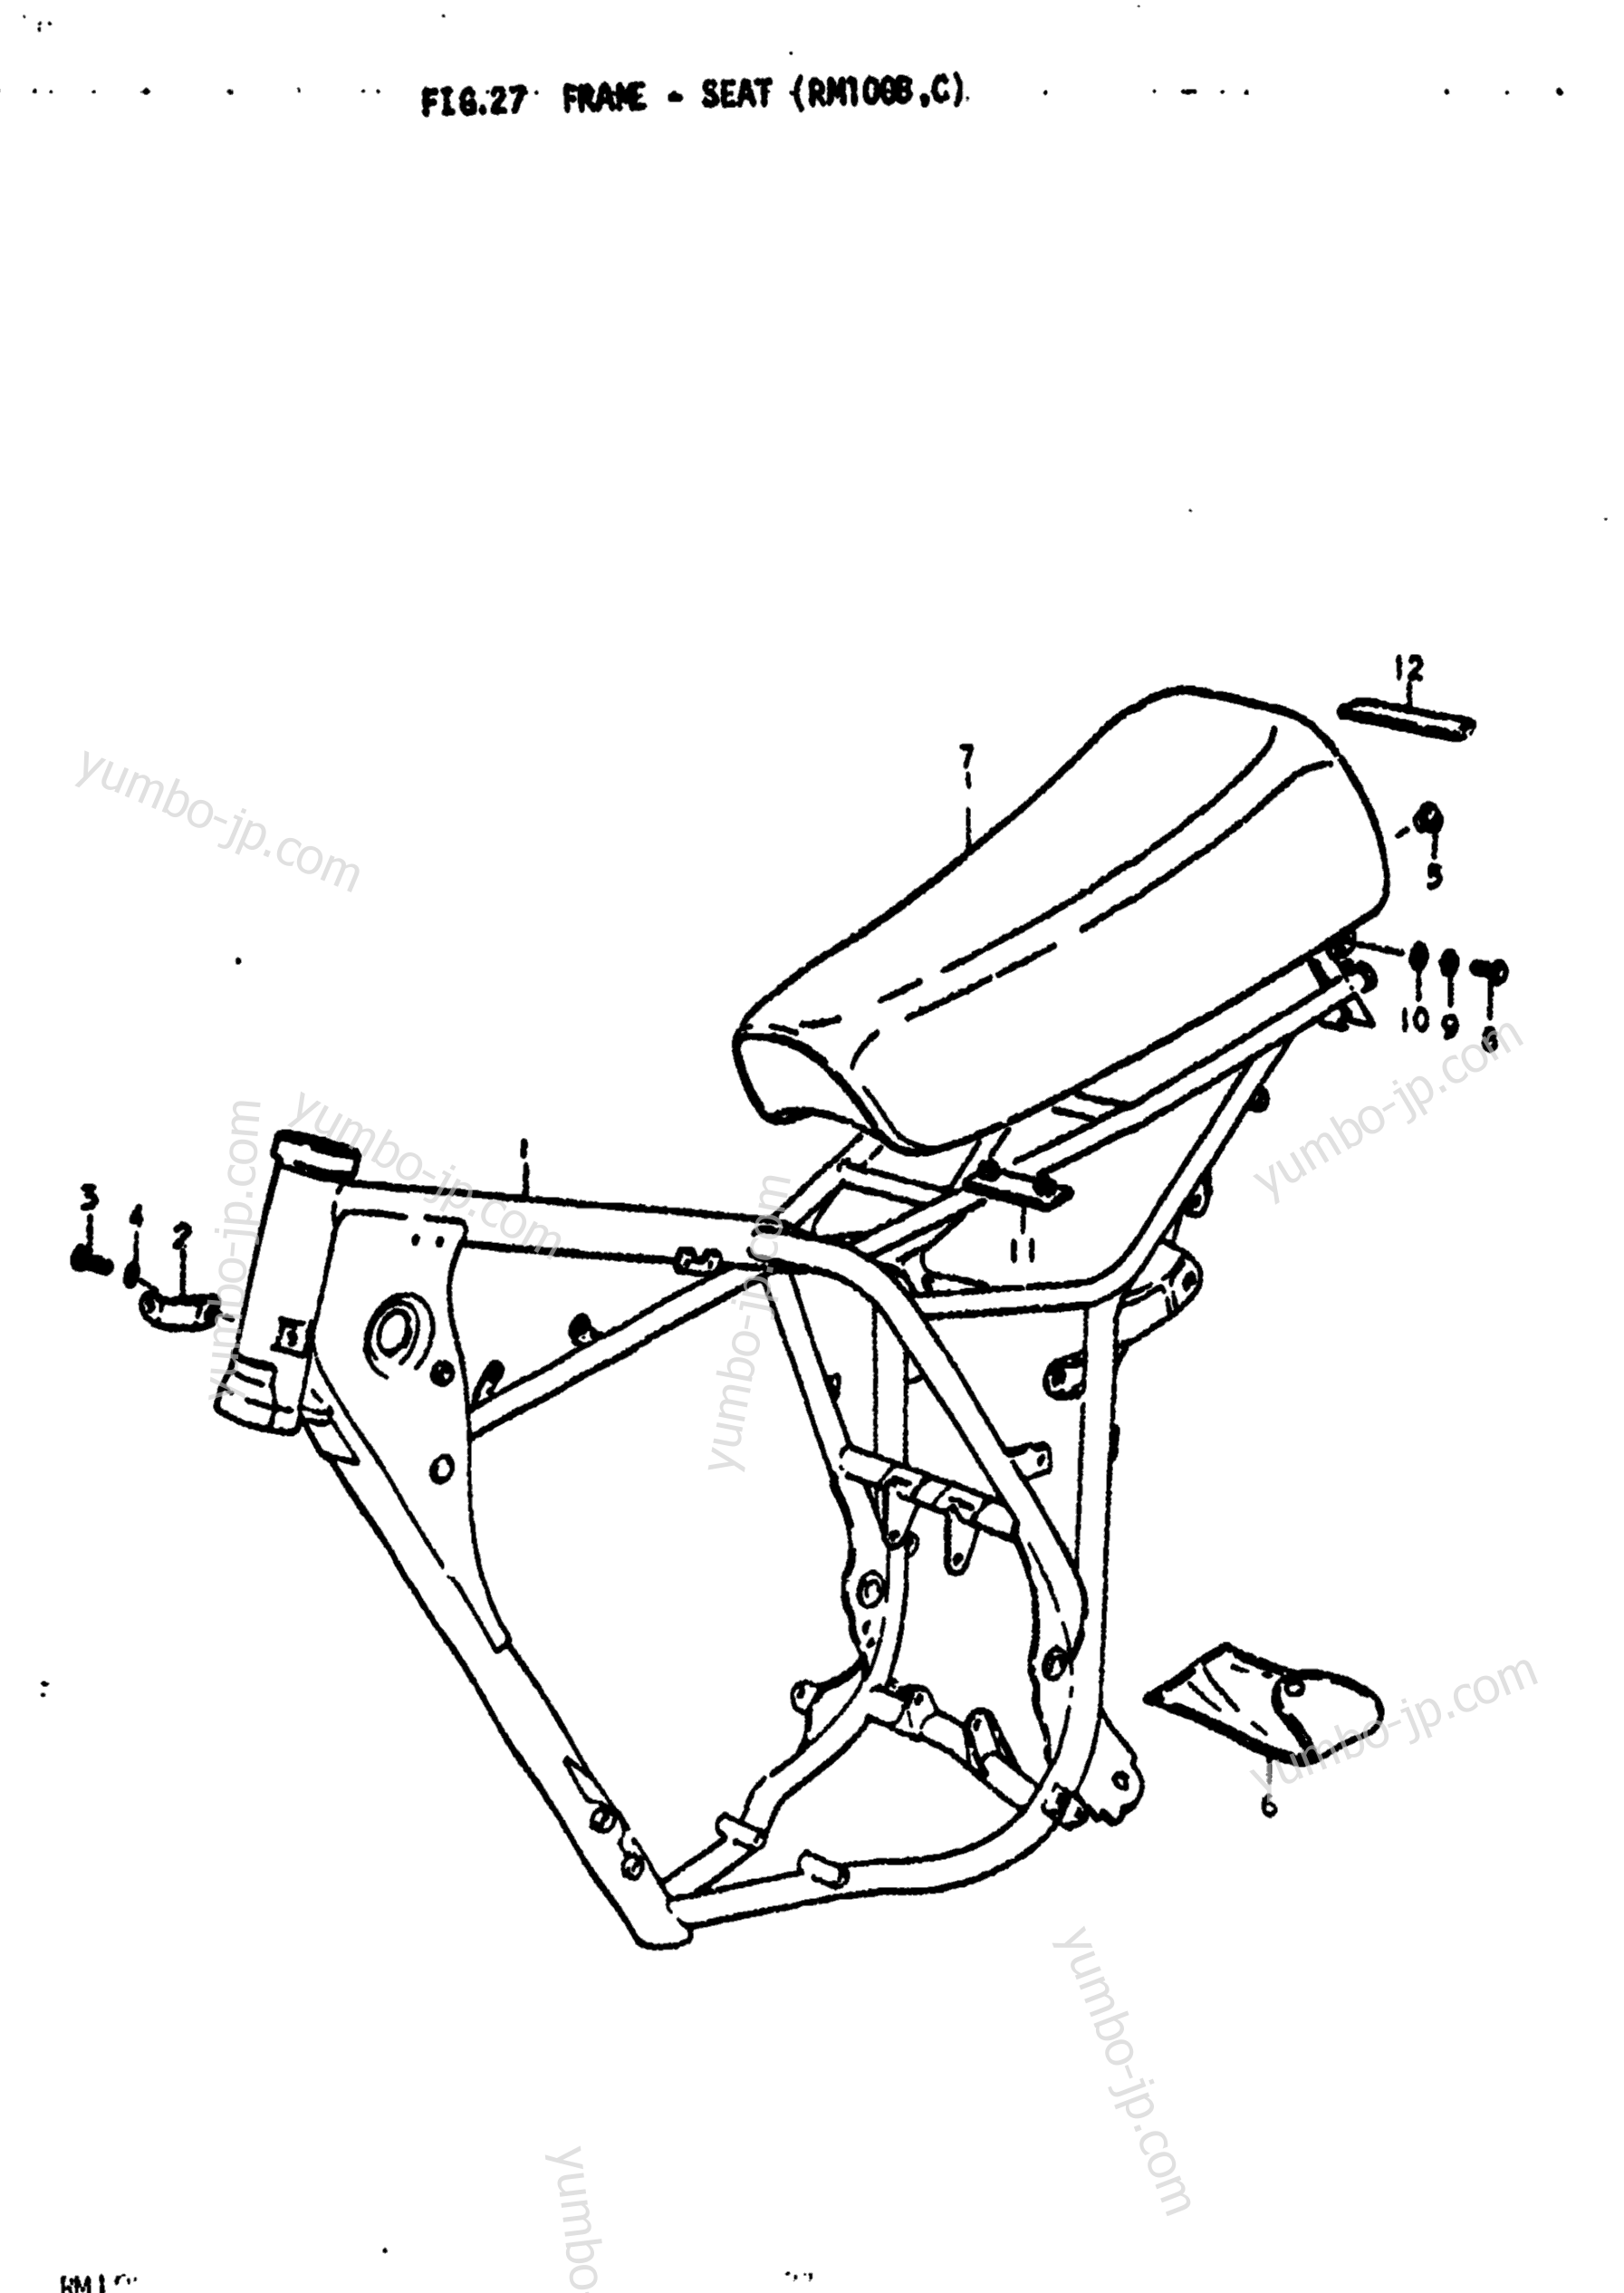 FRAME - SEAT (RM100B for motorcycles SUZUKI RM100 1977 year